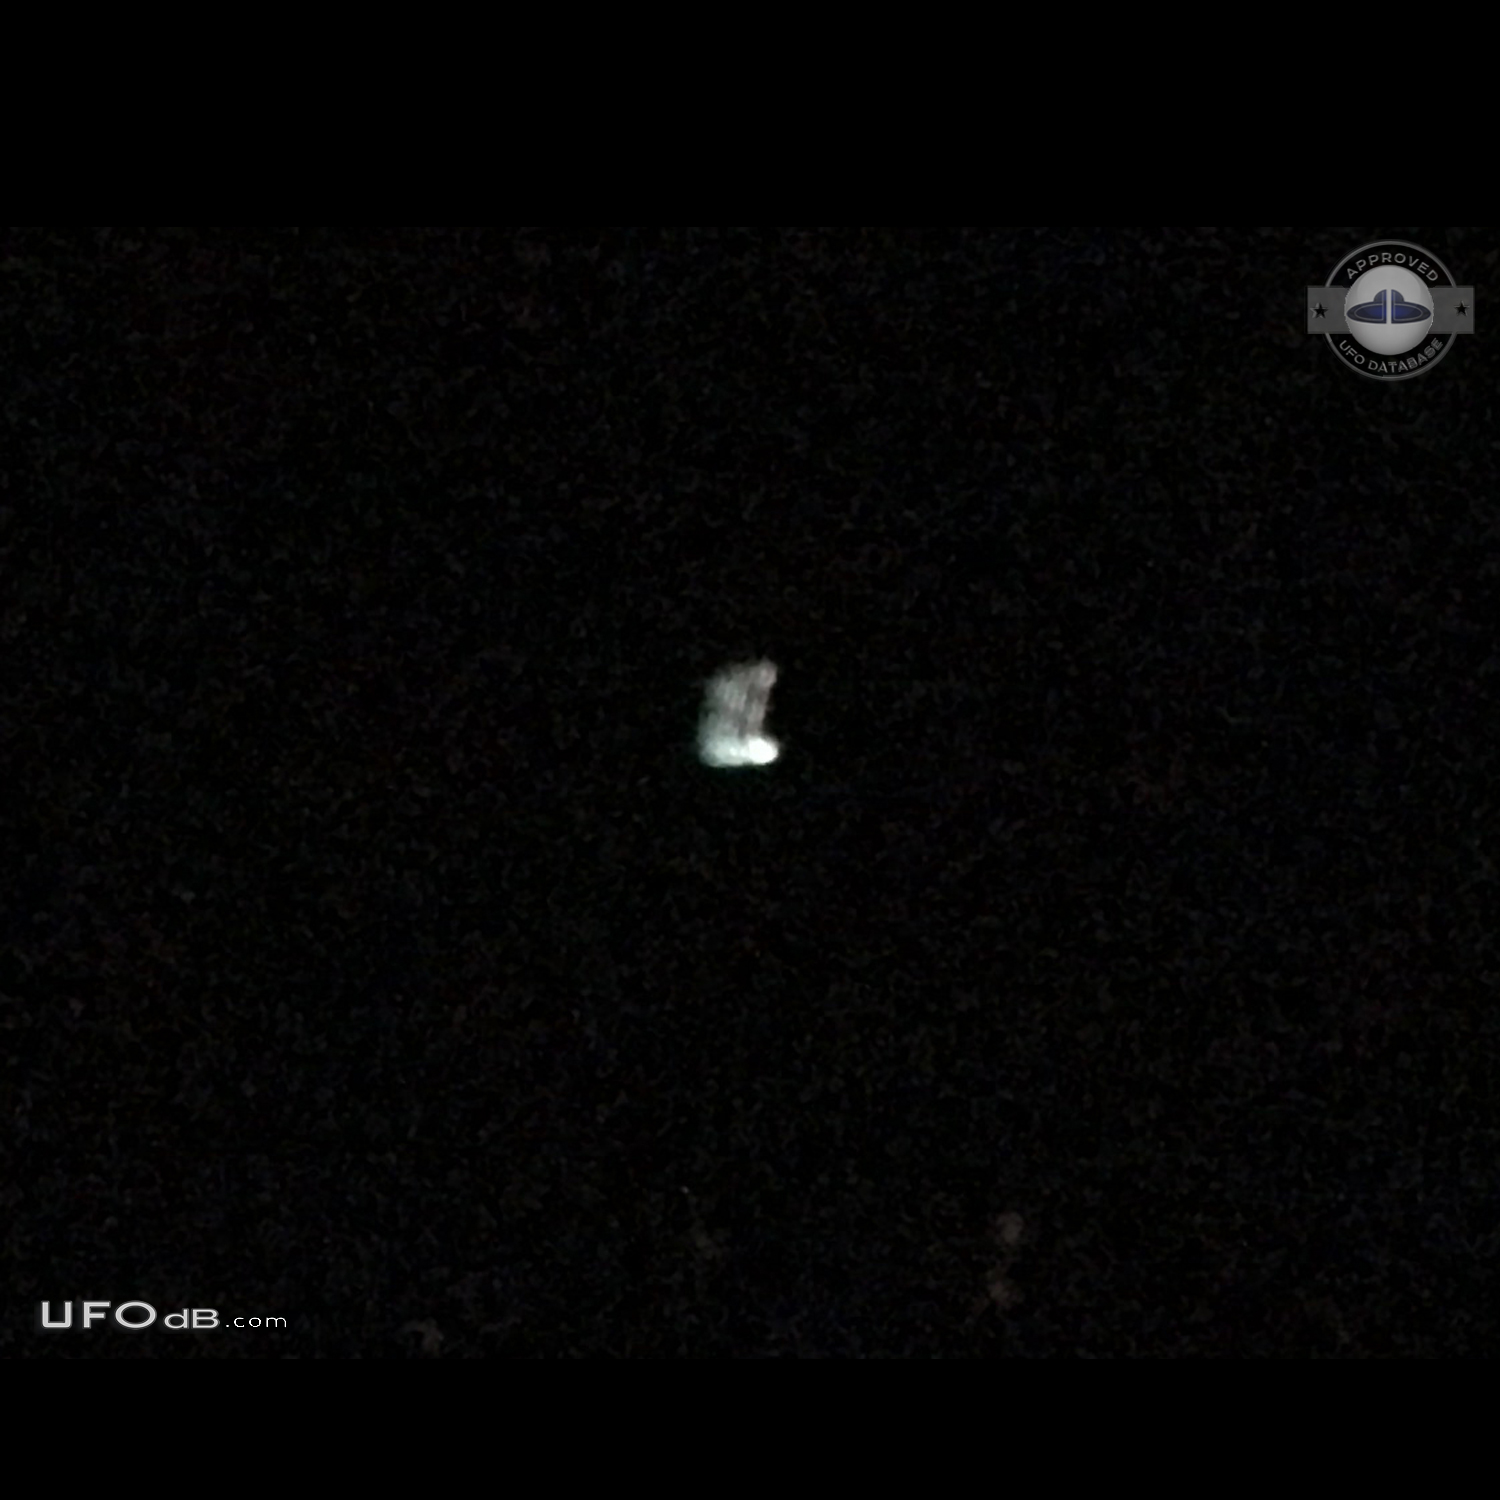 Driving home from ceremony saw strange UFO in the sky - Minnesota USA  UFO Picture #757-1